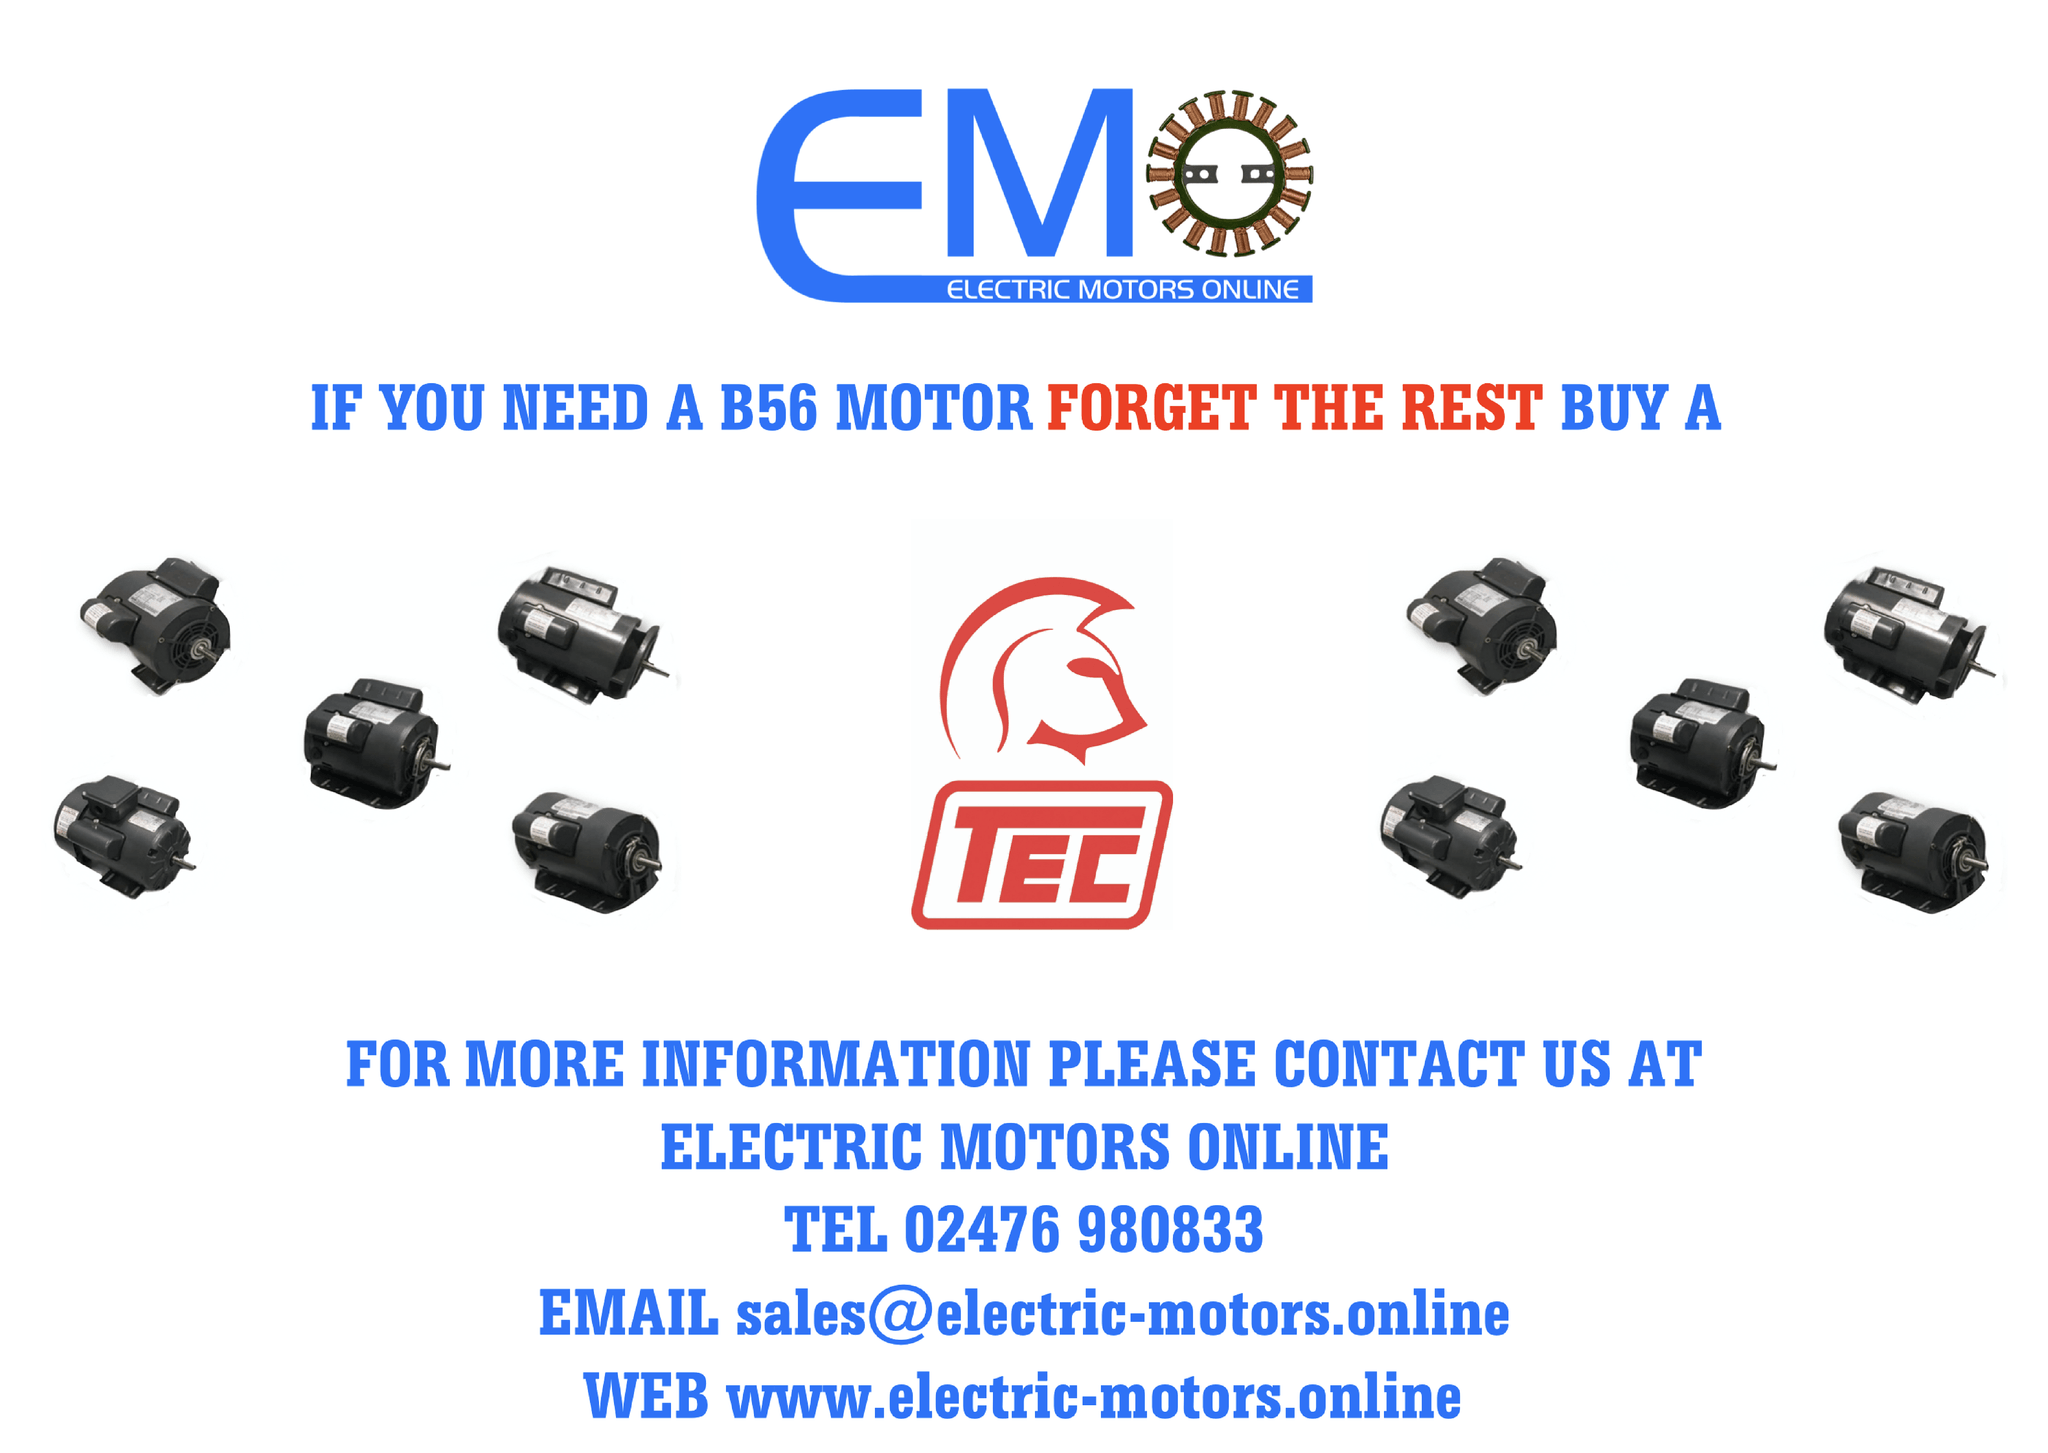 If you need a B56 Motor Forget the rest buy a TEC